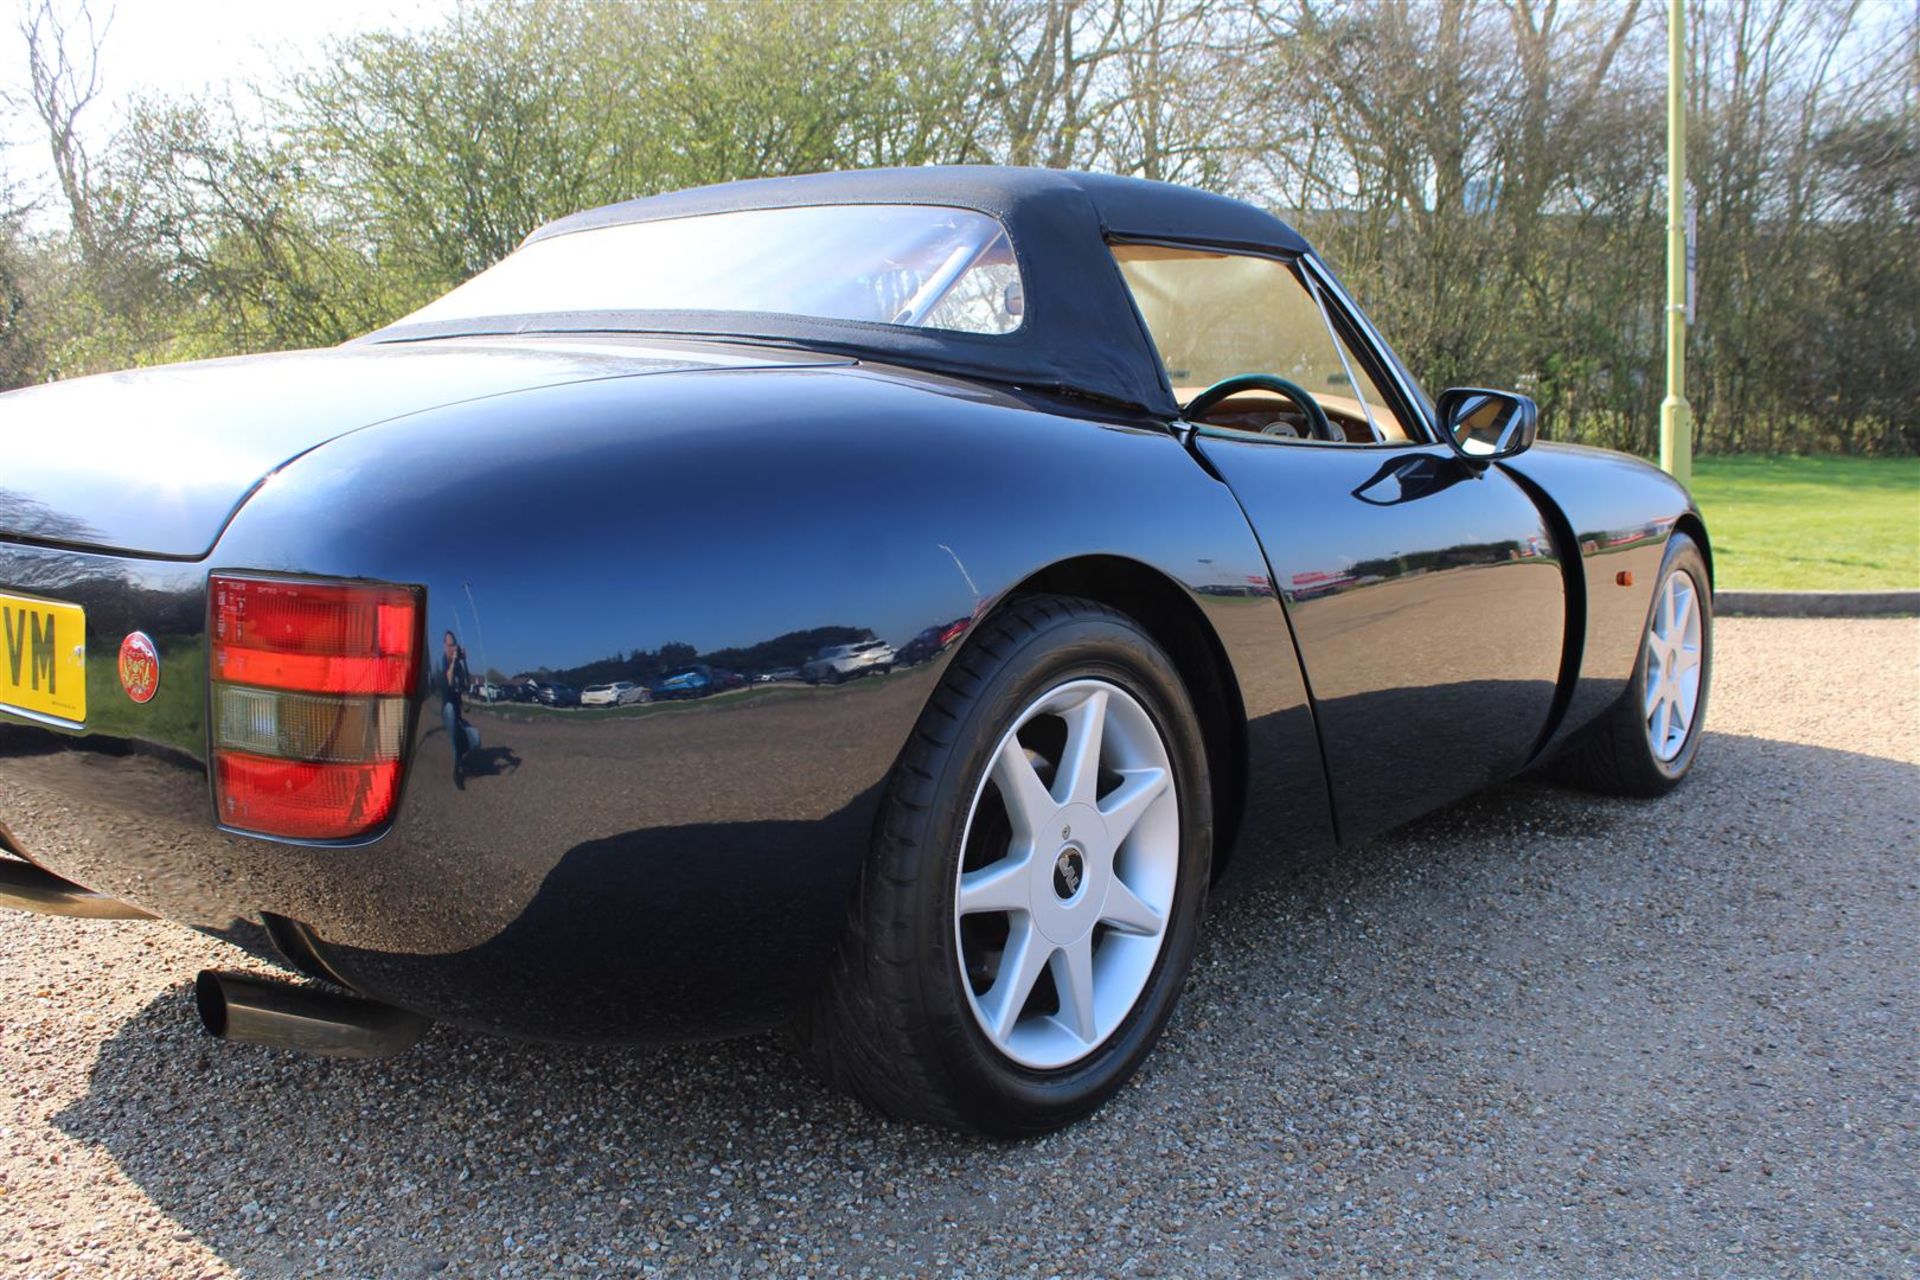 1993 TVR Griffith 500 - Image 9 of 19